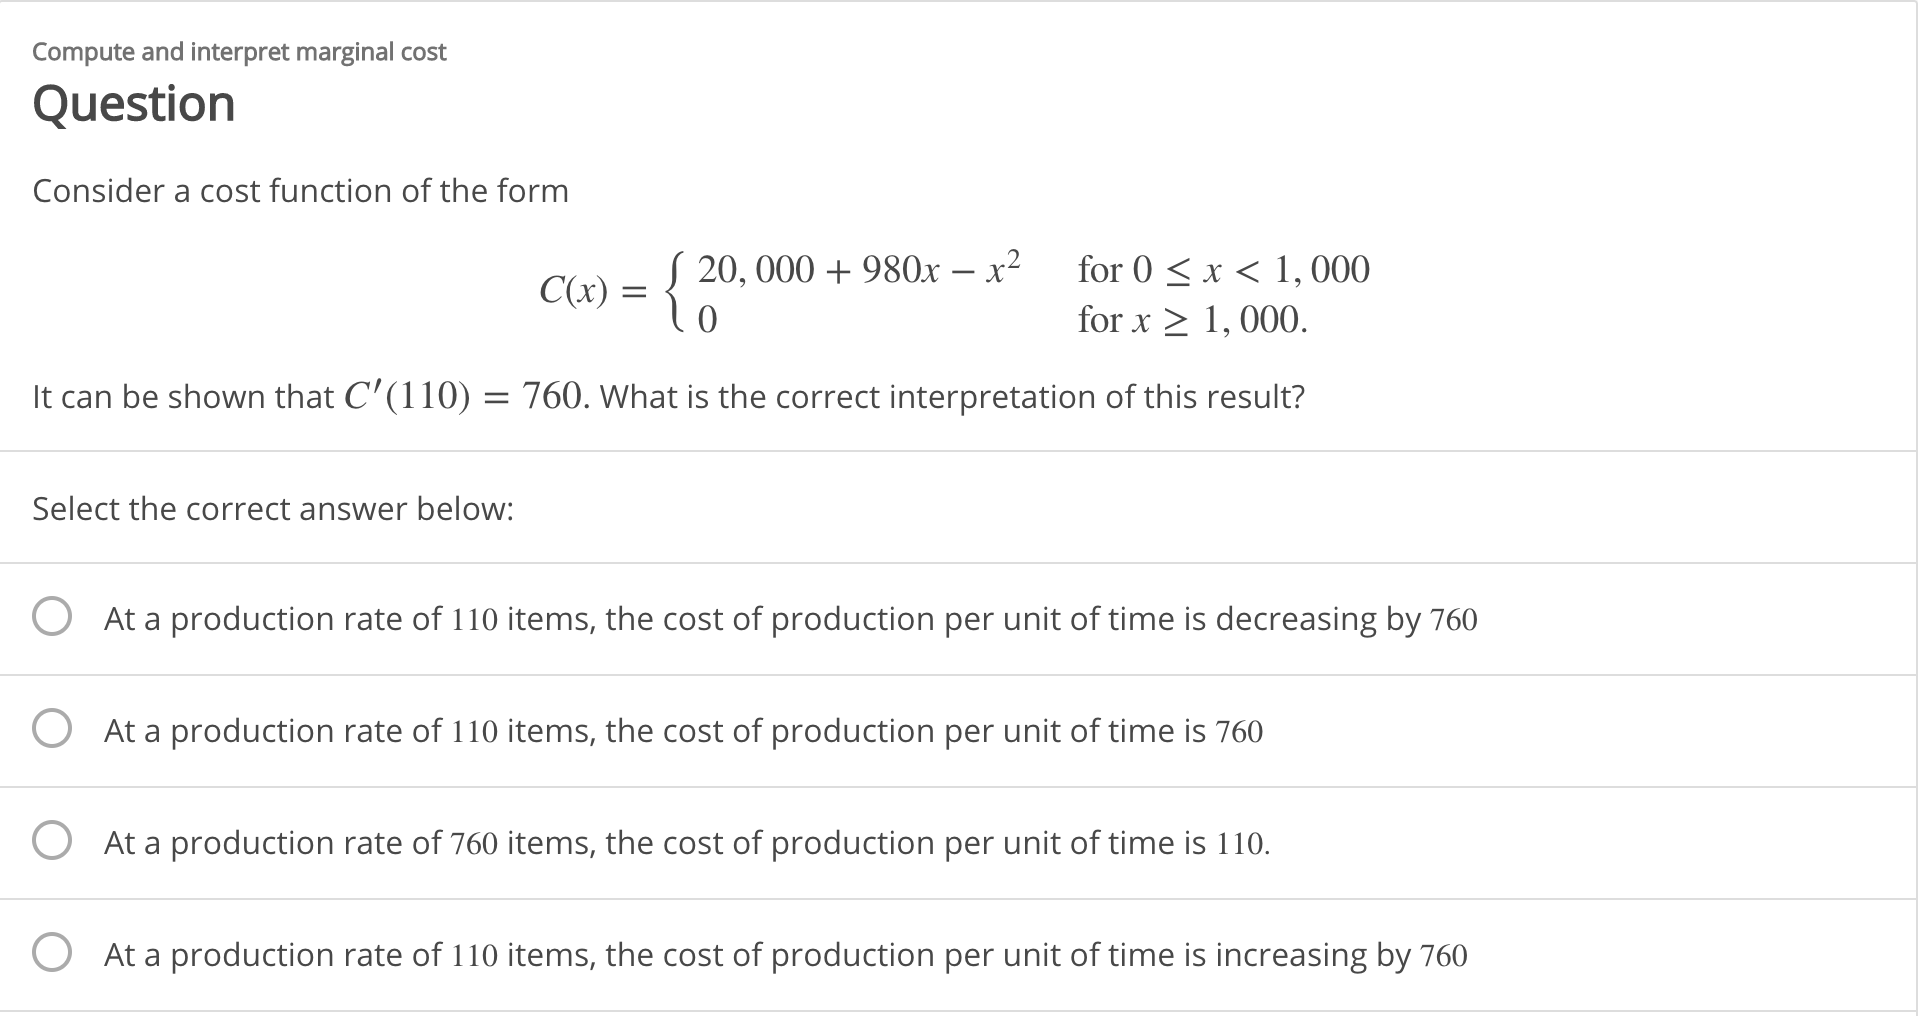 Compute and interpret marginal cost
Question
Consider a cost function of the form
for 0 < x < 1,000
S 20, 000 + 980x – x²
C(x) =
for x > 1, 000.
It can be shown that C'(110) = 760. What is the correct interpretation of this result?
Select the correct answer below:
O At a production rate of 110 items, the cost of production per unit of time is decreasing by 760
O At a production rate of 110 items, the cost of production per unit of time is 760
O At a production rate of 760 items, the cost of production per unit of time is 110.
At a production rate of 110 items, the cost of production per unit of time is increasing by 760
